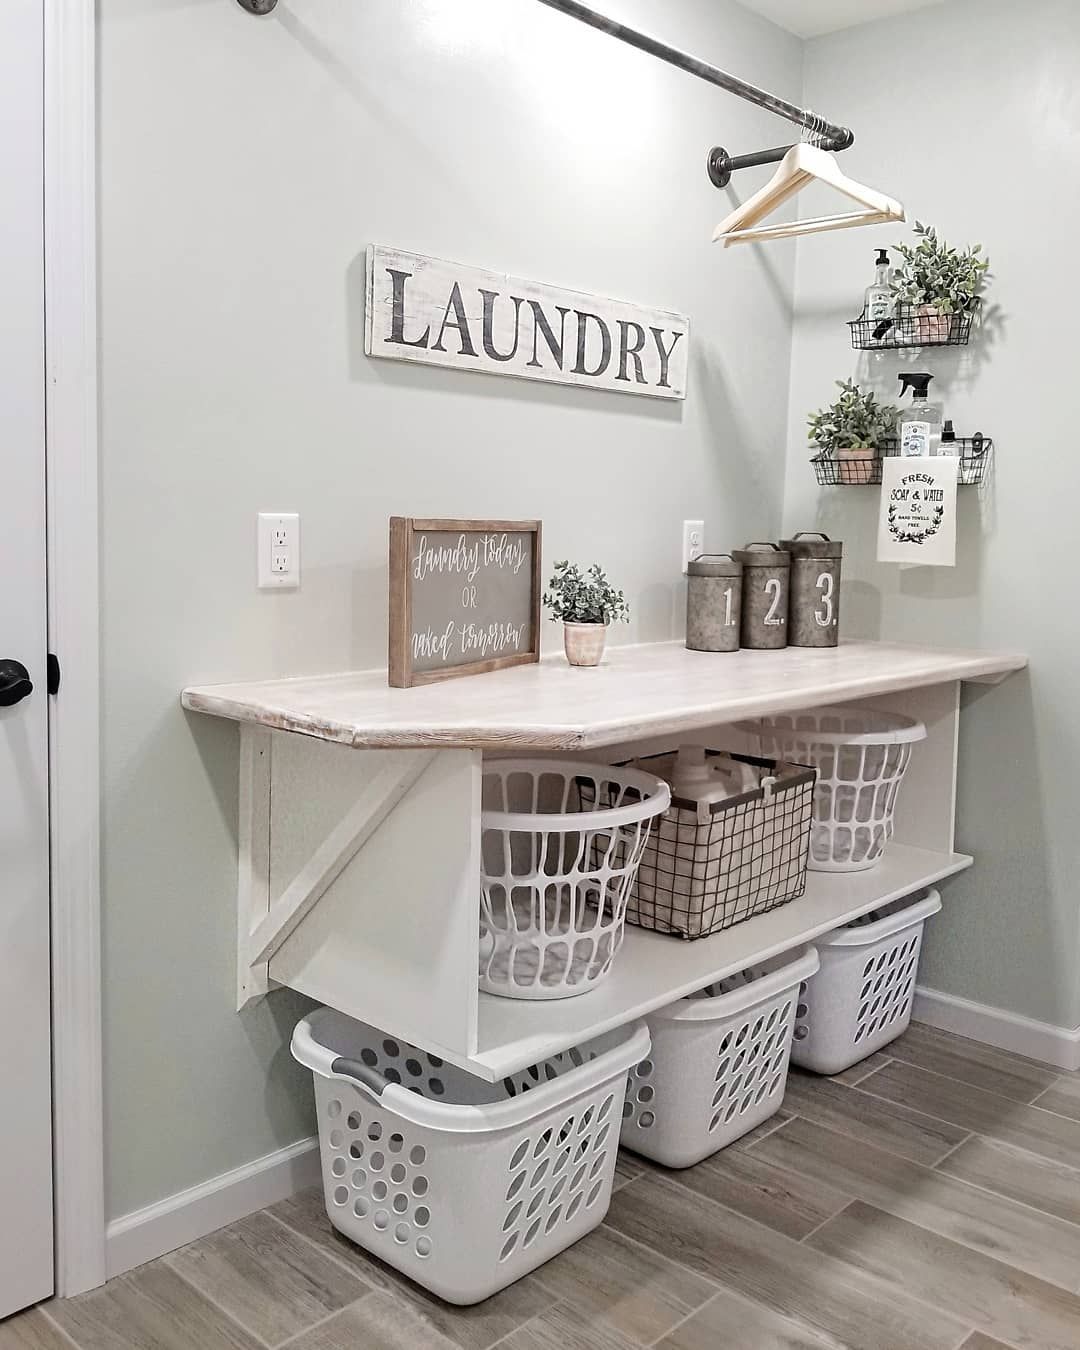 20 Brilliant Laundry Room Ideas for Small Spaces – Practical & Efficient